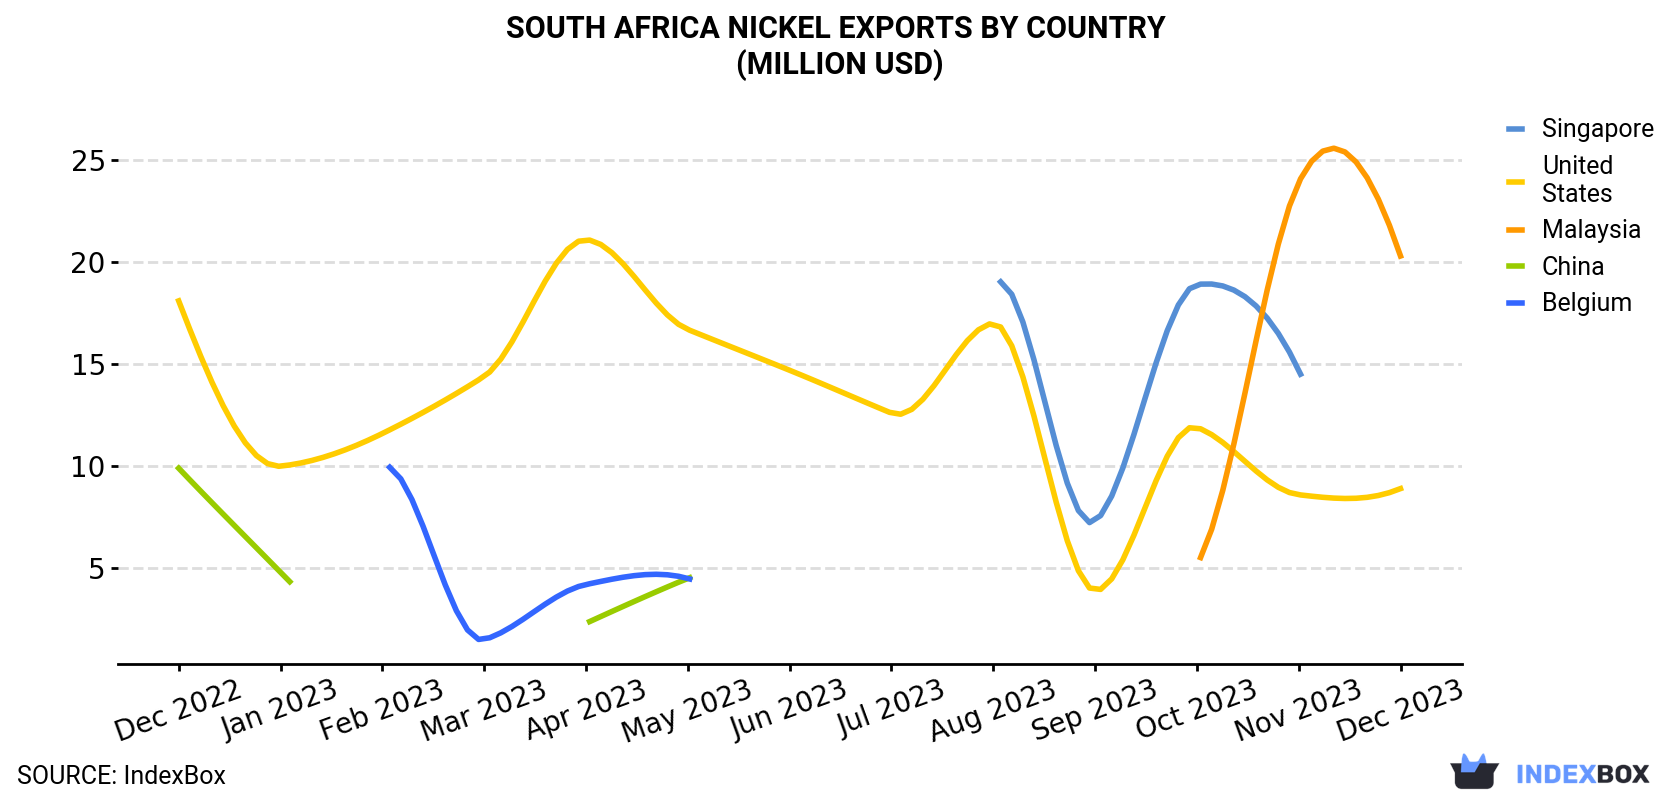 South Africa Nickel Exports By Country (Million USD)